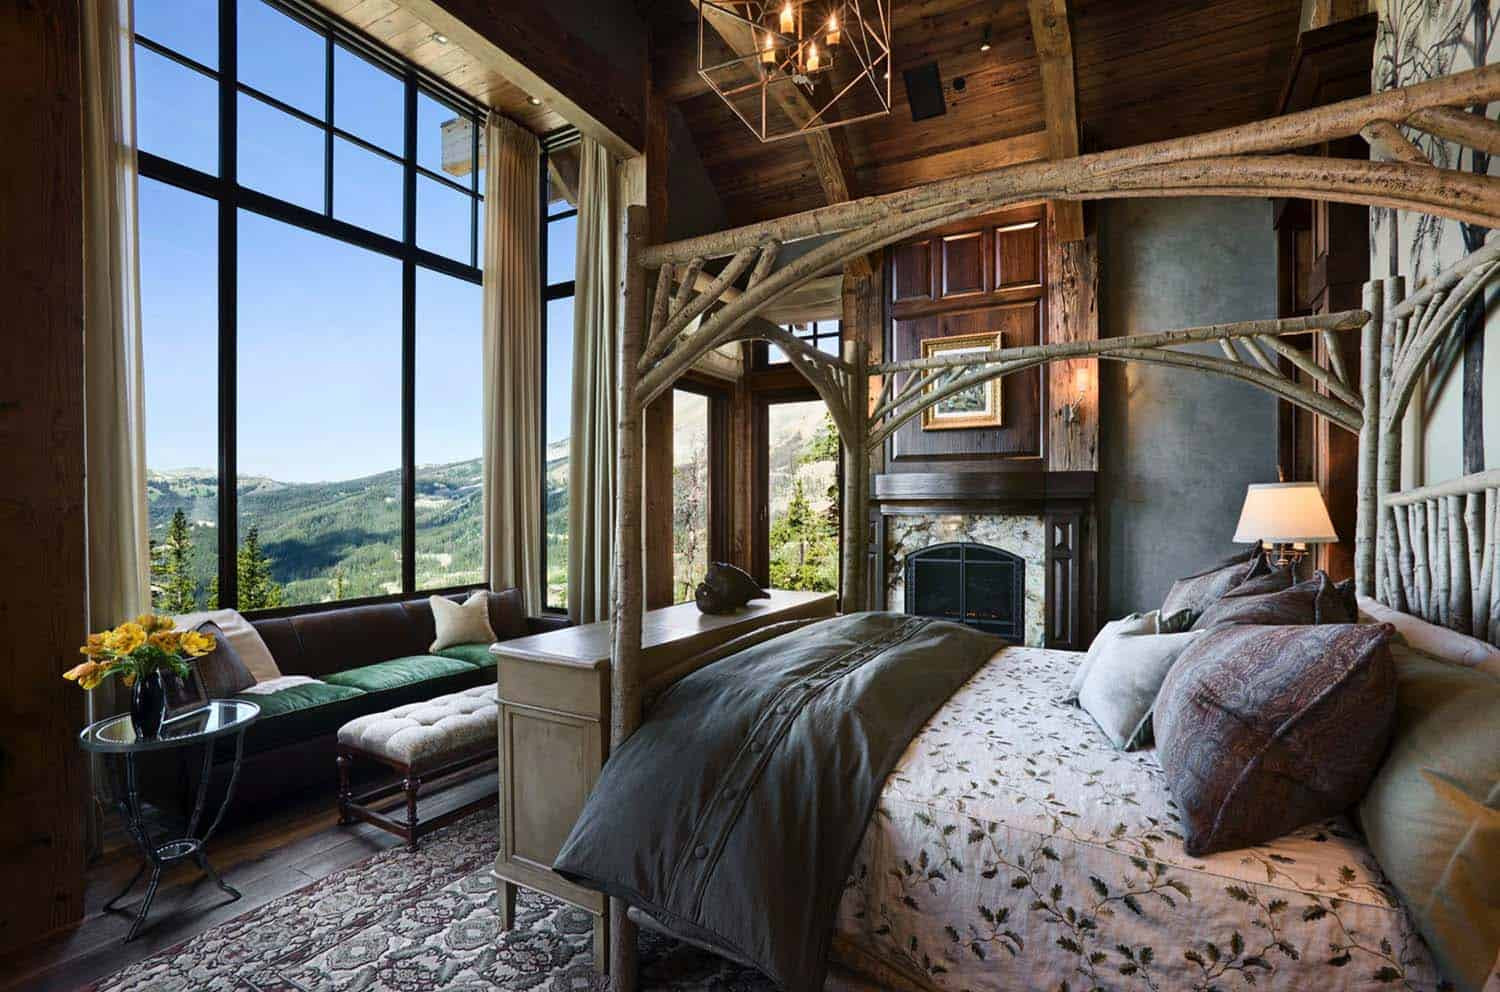 Rustic Country Bedroom
 40 Amazing rustic bedrooms styled to feel like a cozy away